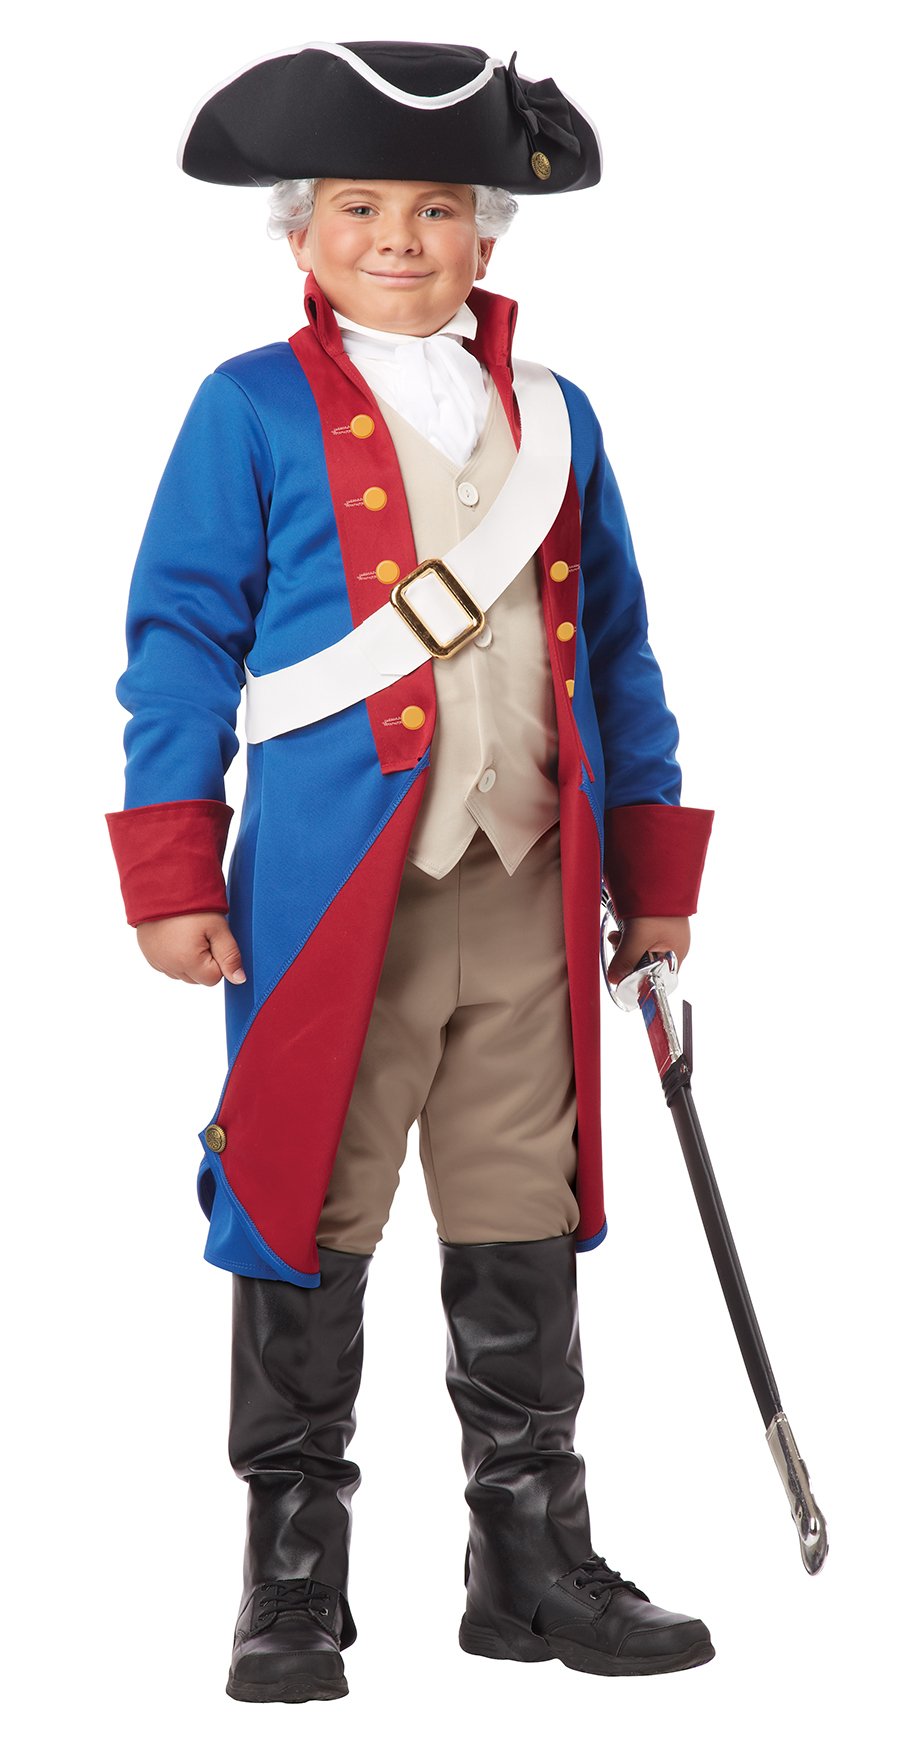 American Patriot with Jacket